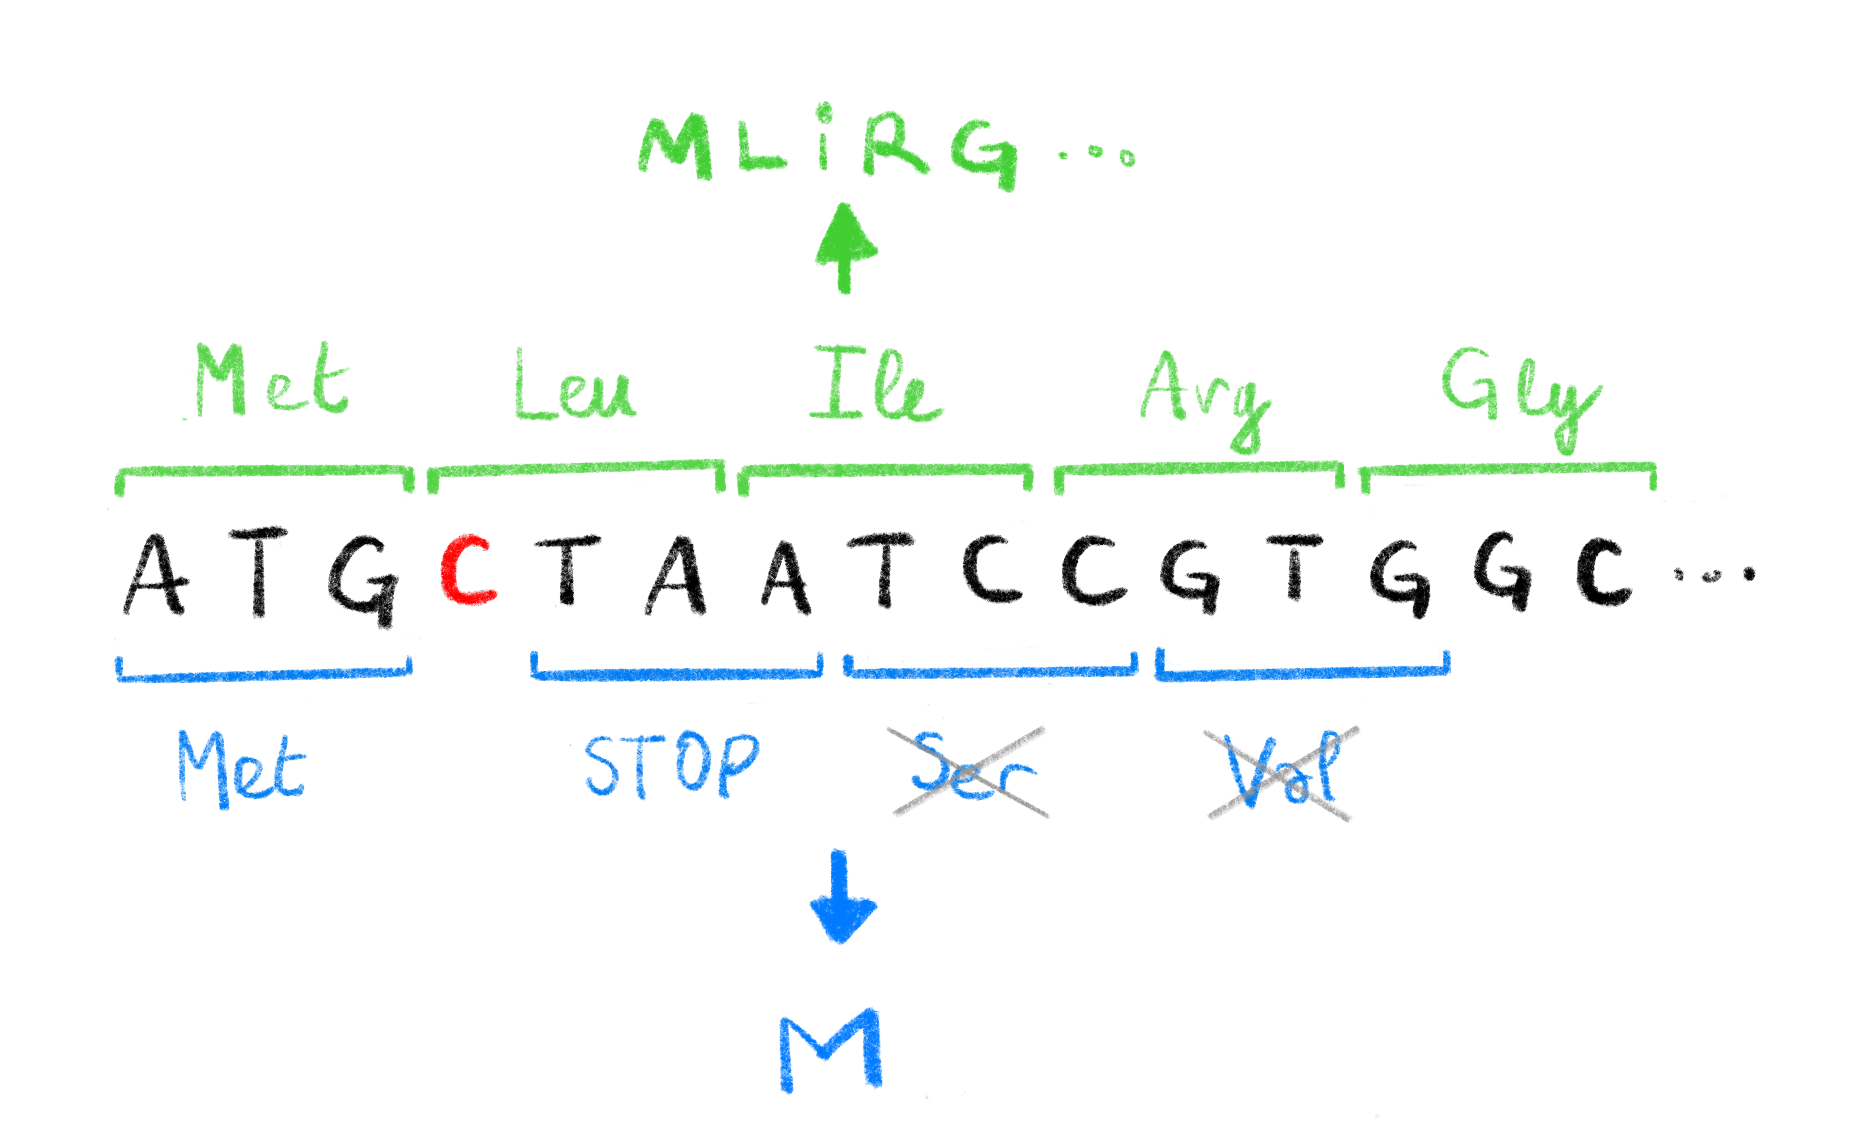 **Effect of frameshift mutations.**  
The deletion of a single C (highlighted in red) in the original DNA sequence leads to a change in the codons read during translation. The original codons (shown in green, with corresponding amino acids, above the sequence) translate to a functional protein `MLIRG...`. The new codons caused by the deletion (shown in blue, with corresponding amino acids, below the sequence), induce a premature STOP codon leading to a non-functional protein `M`. The Serine and Valine codons are not translated due to the STOP codon. 
